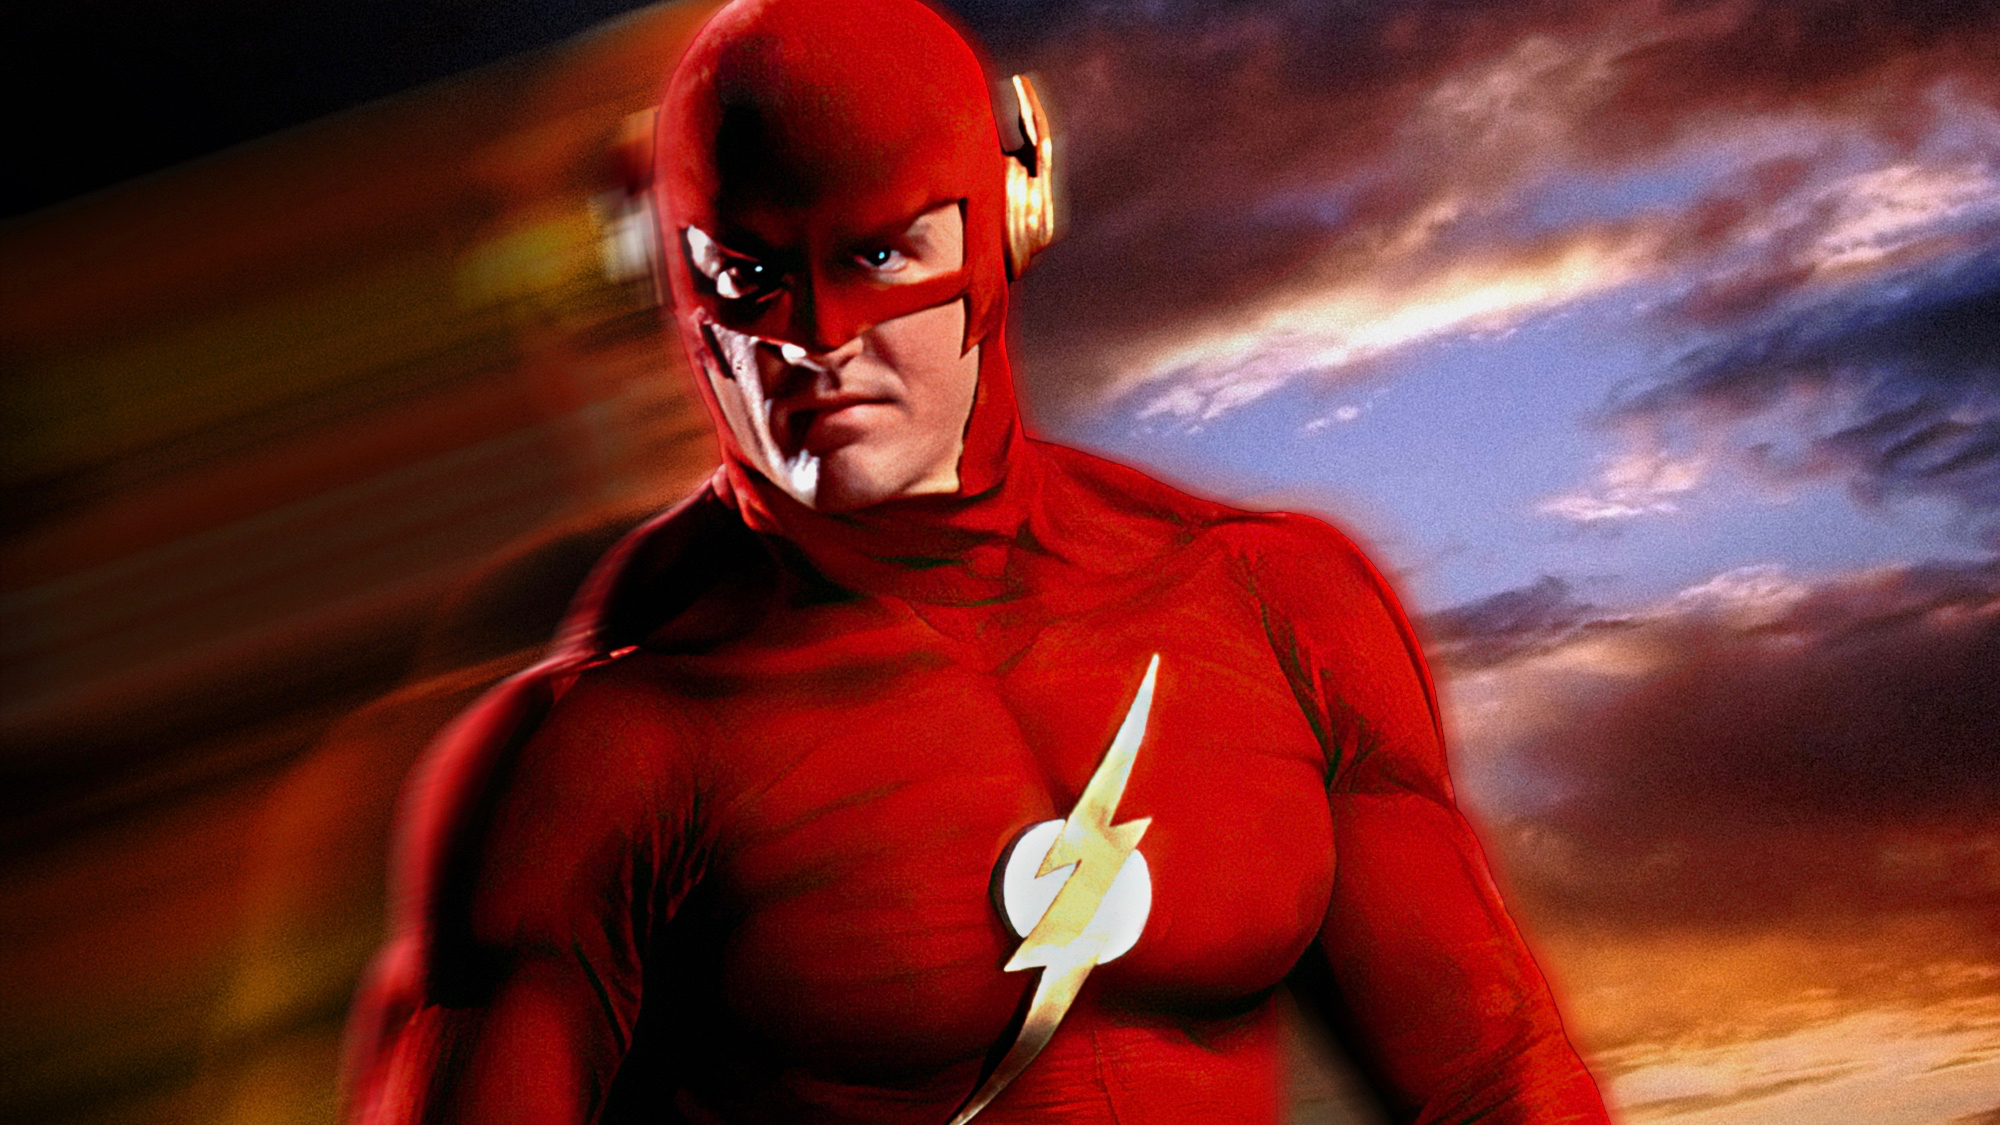 TV Show The Flash (1990) HD Wallpaper | Background Image